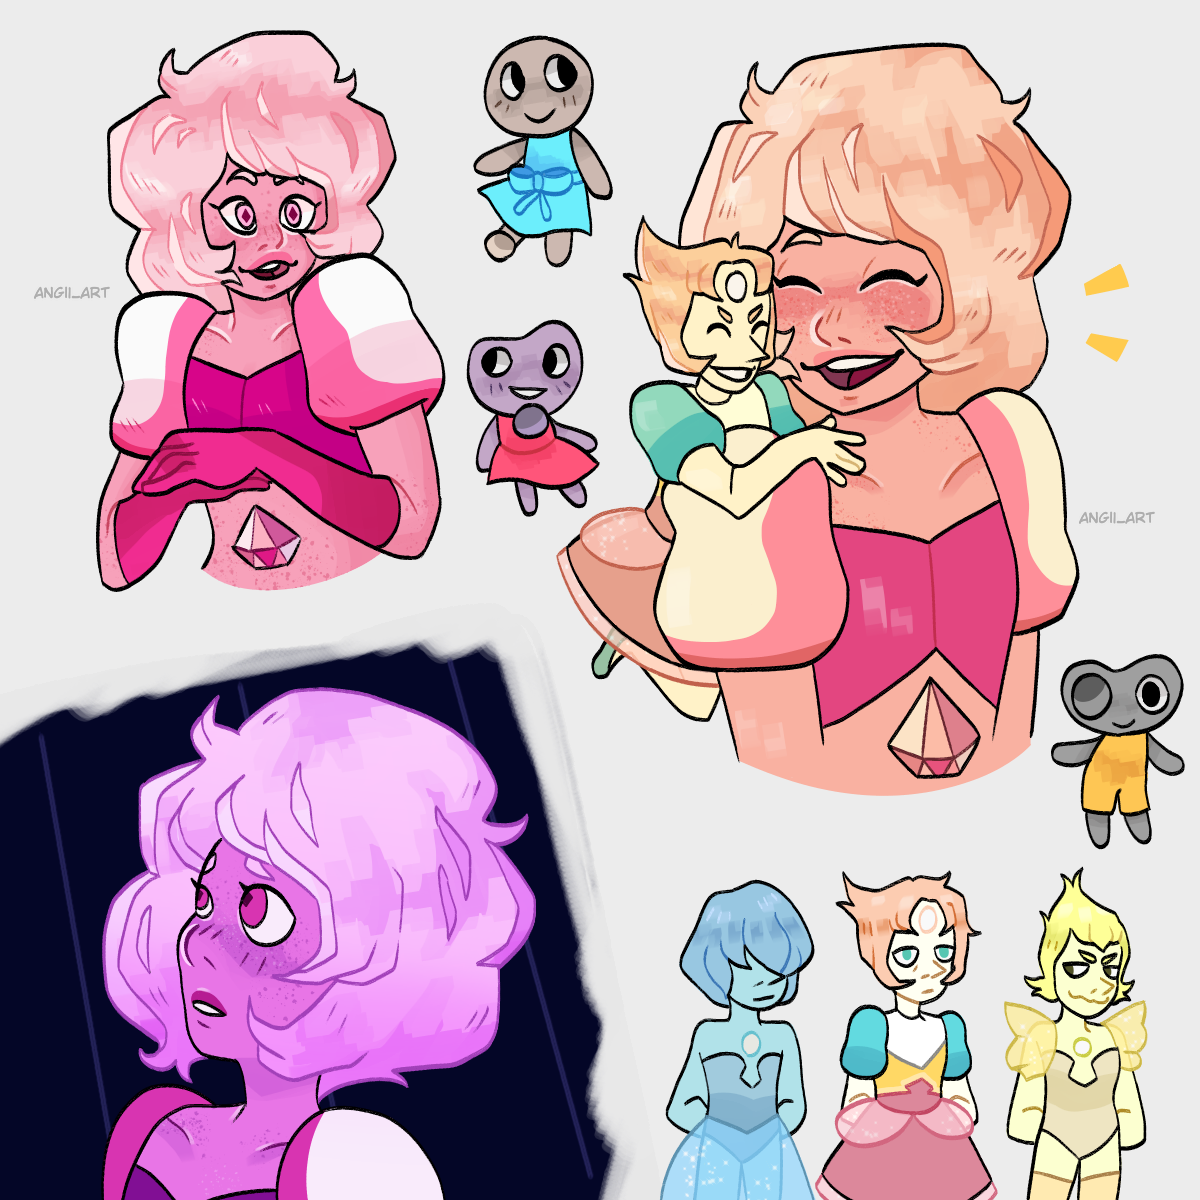 pink is fun to draw lol familiar was cool, su has been kinda going downhill lately but its getting pretty cool again!! and i really enjoy it (gotta let yourself enjoy things sometimes man)